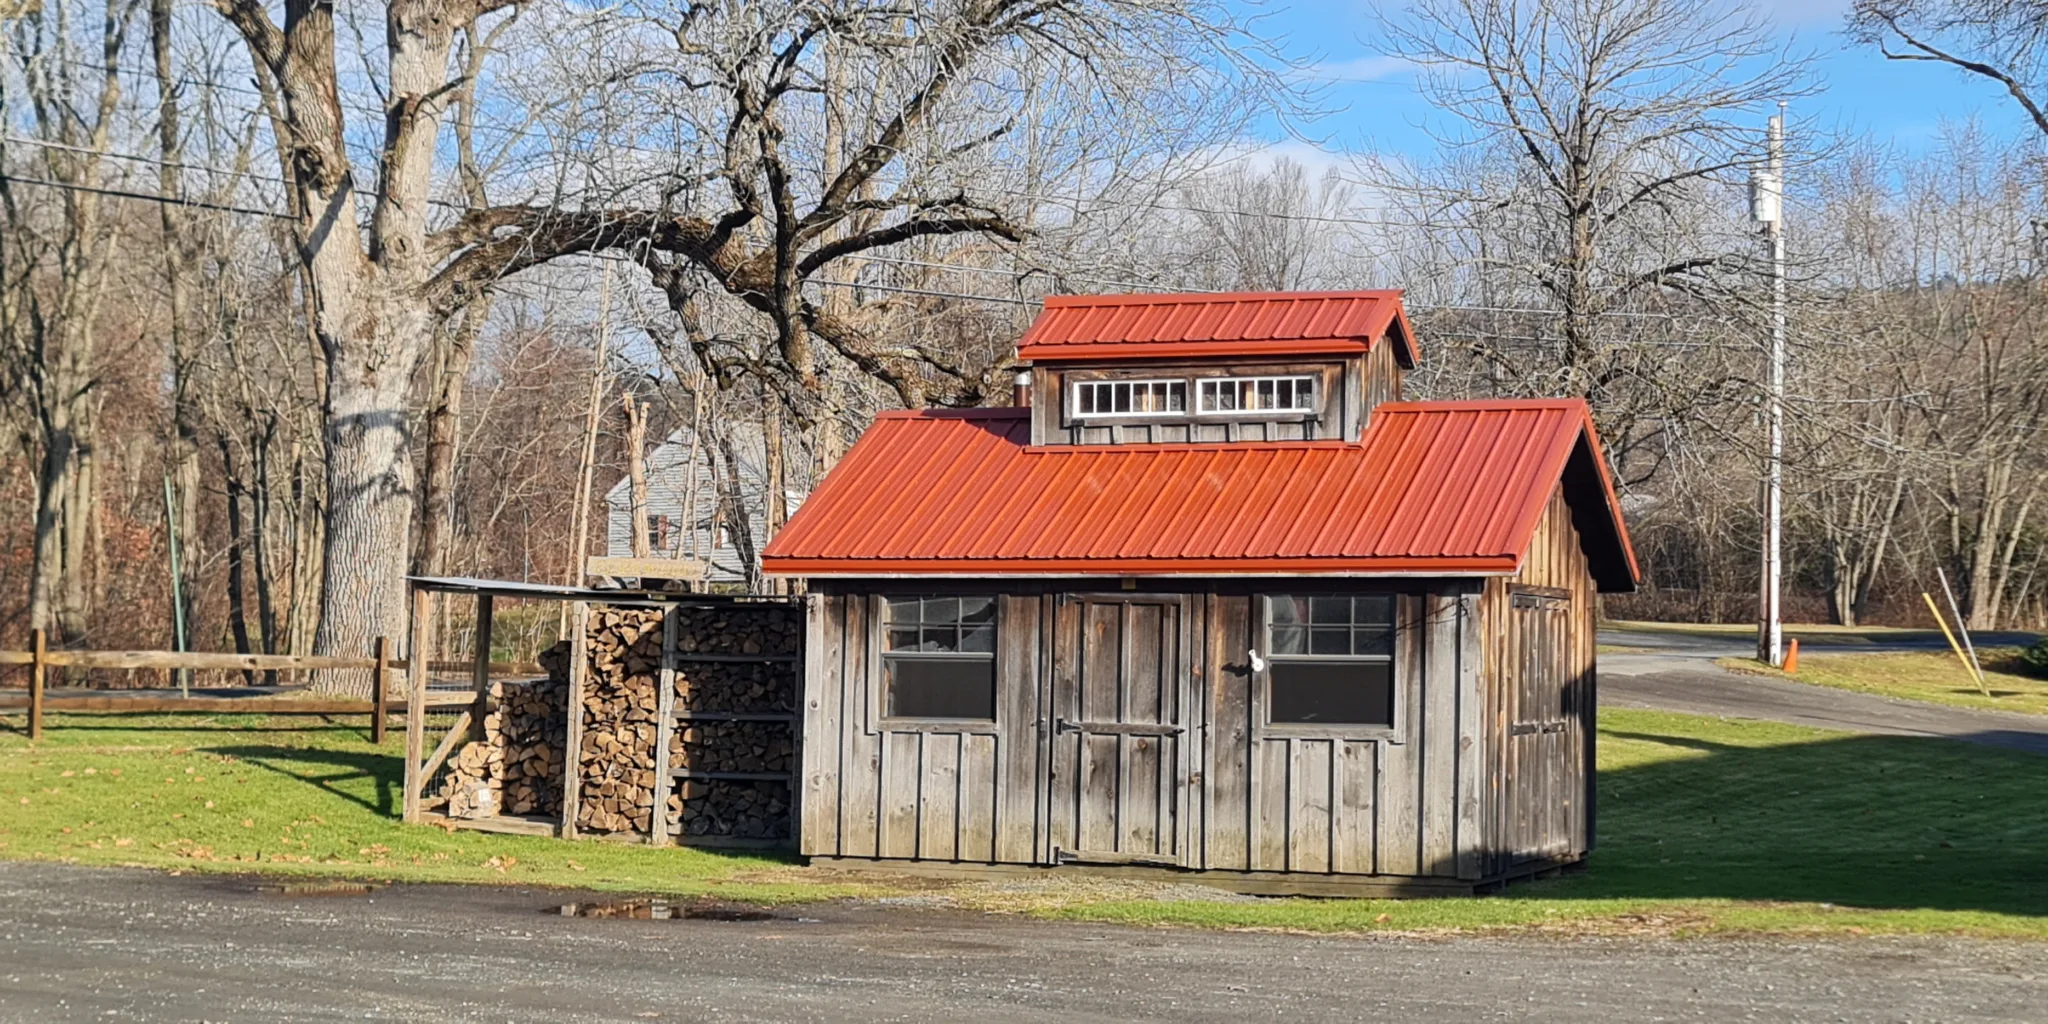 A small building for making maple syrup.